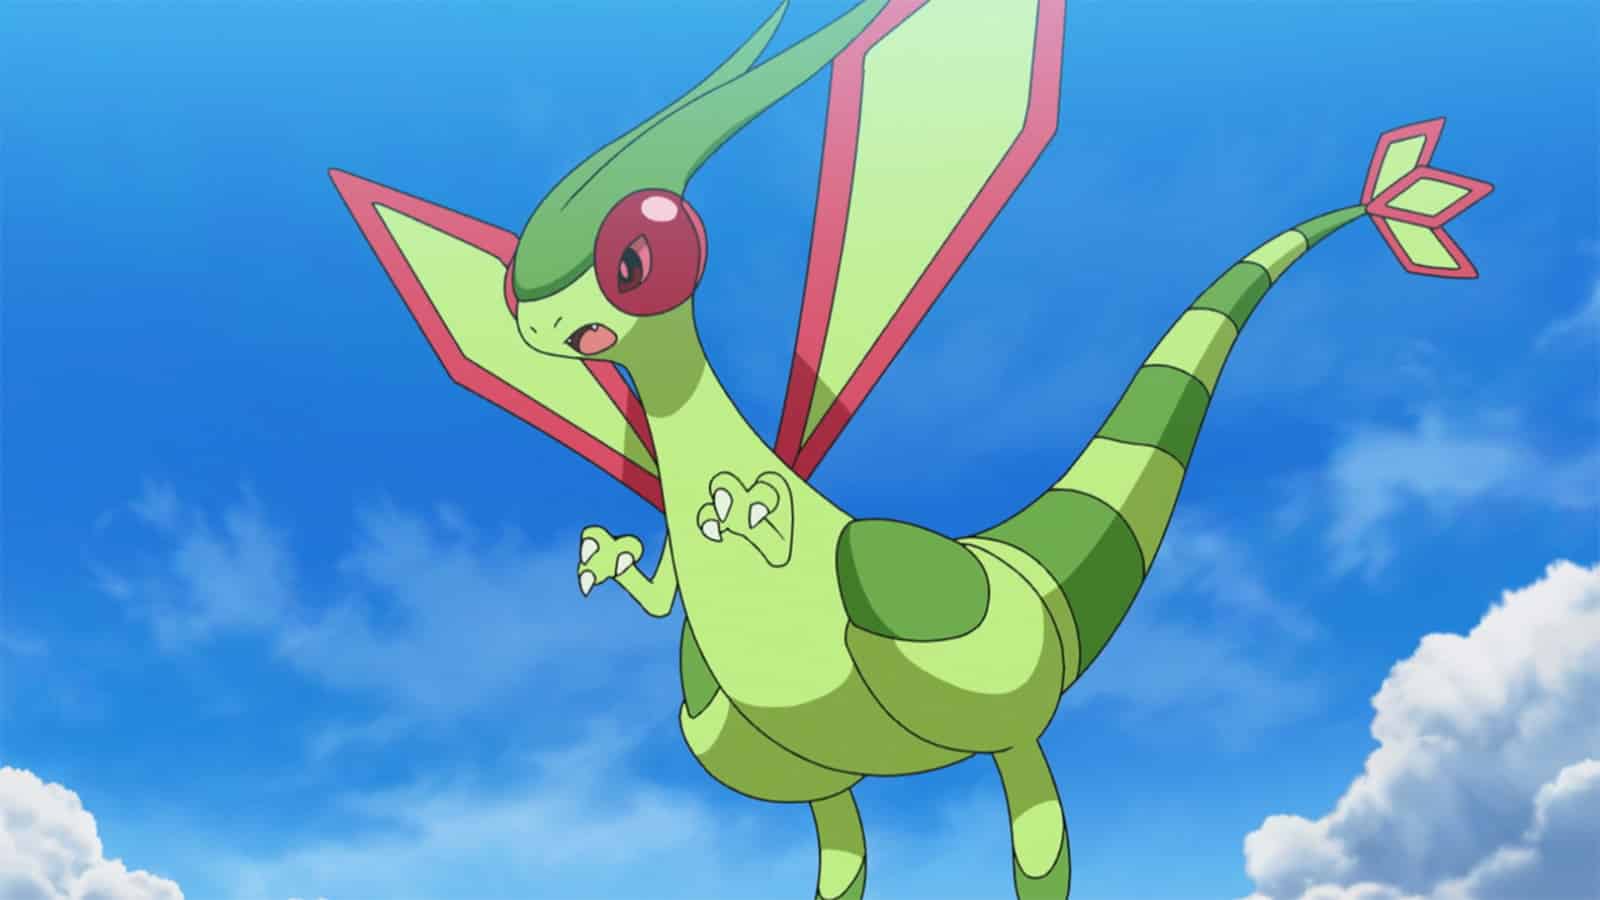 Flygon appearing in the Pokemon anime